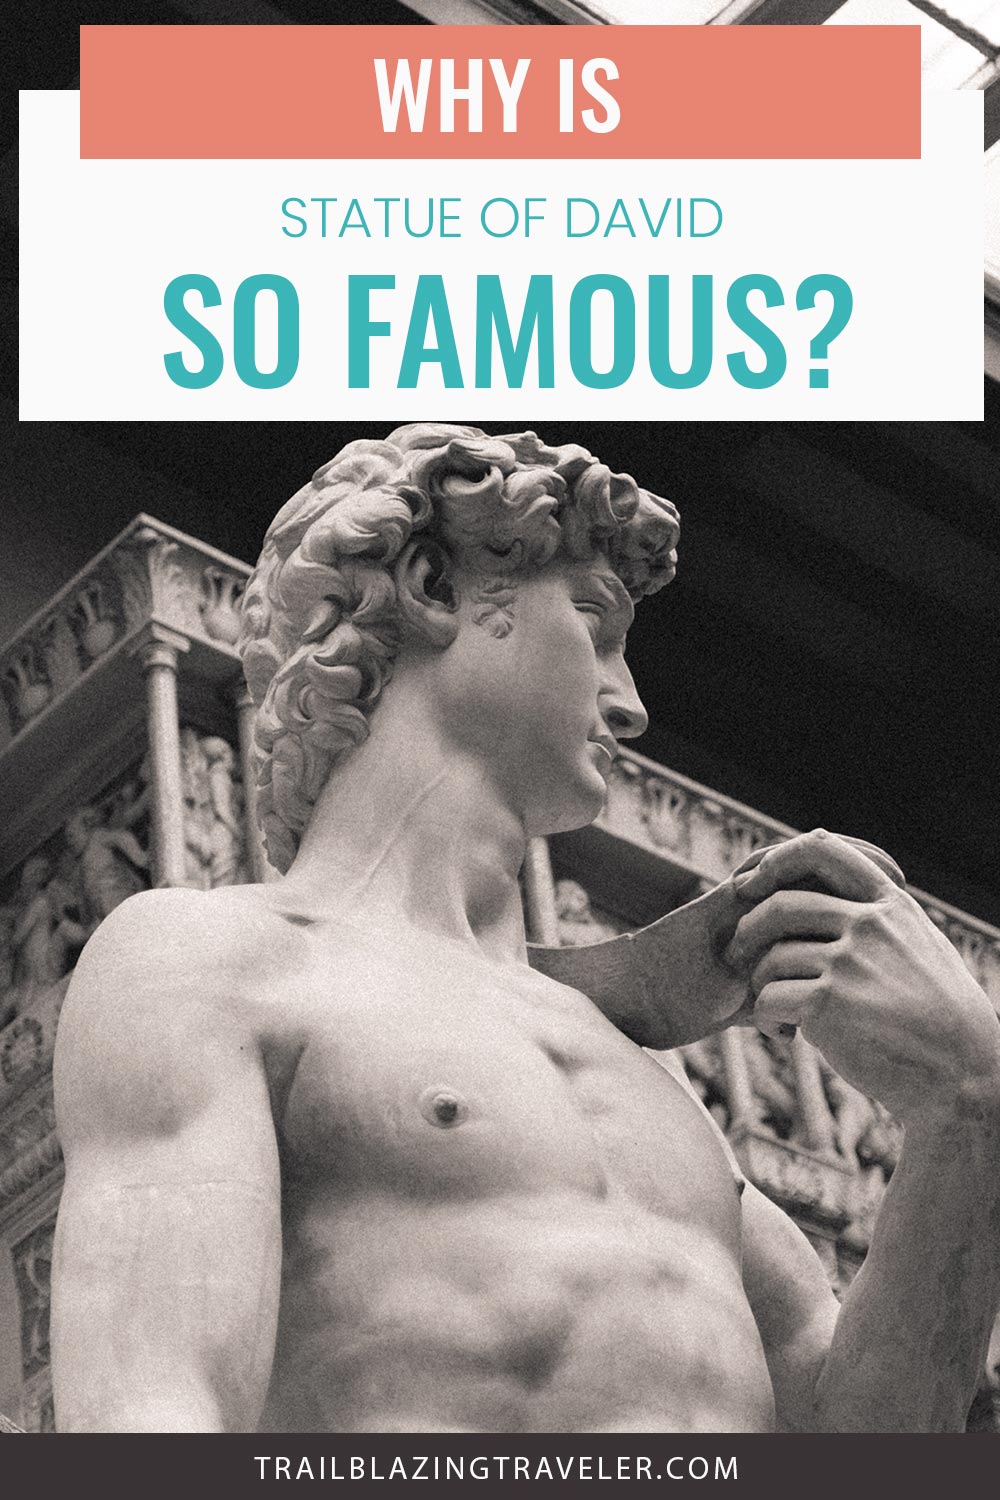 Why Is Statue Of David So Famous?